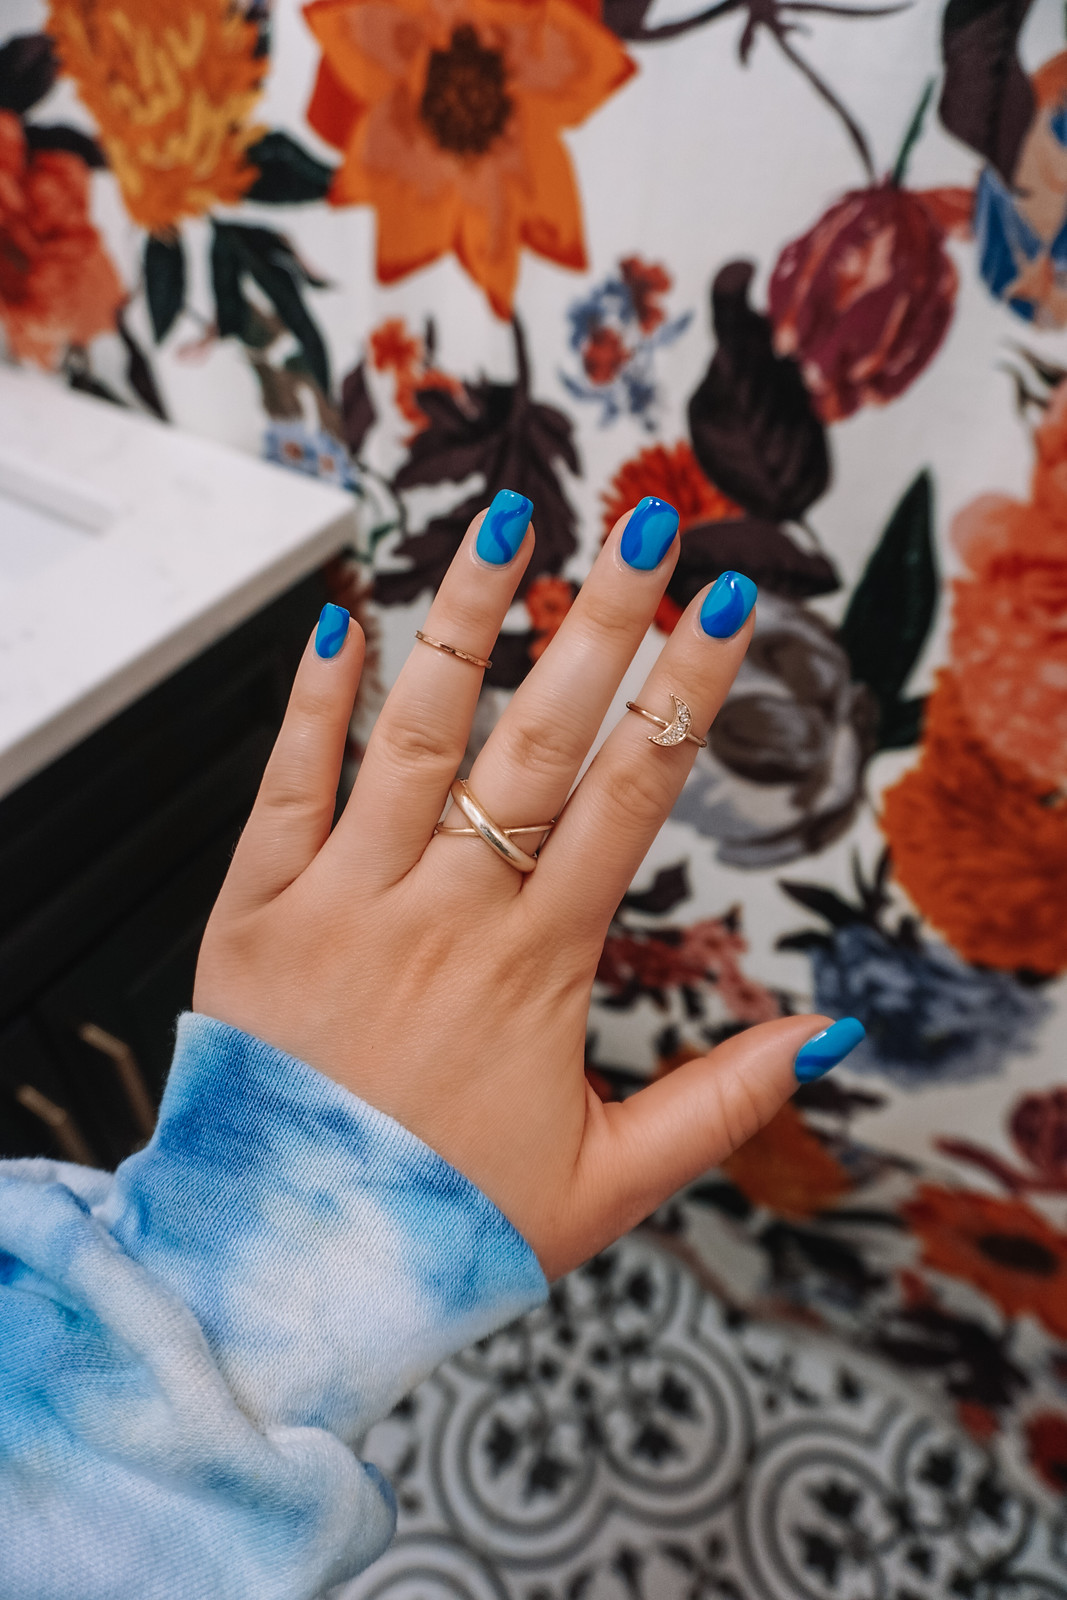 Manicure of the Month : Blue Wave Nail Design | Blue Squiggly Line Nail Art | Summer 2020 Nails | Manicure Ideas | Blue Mani | Color Gel Manicure | Nails 2020 Trends | Short Acrylic Nails